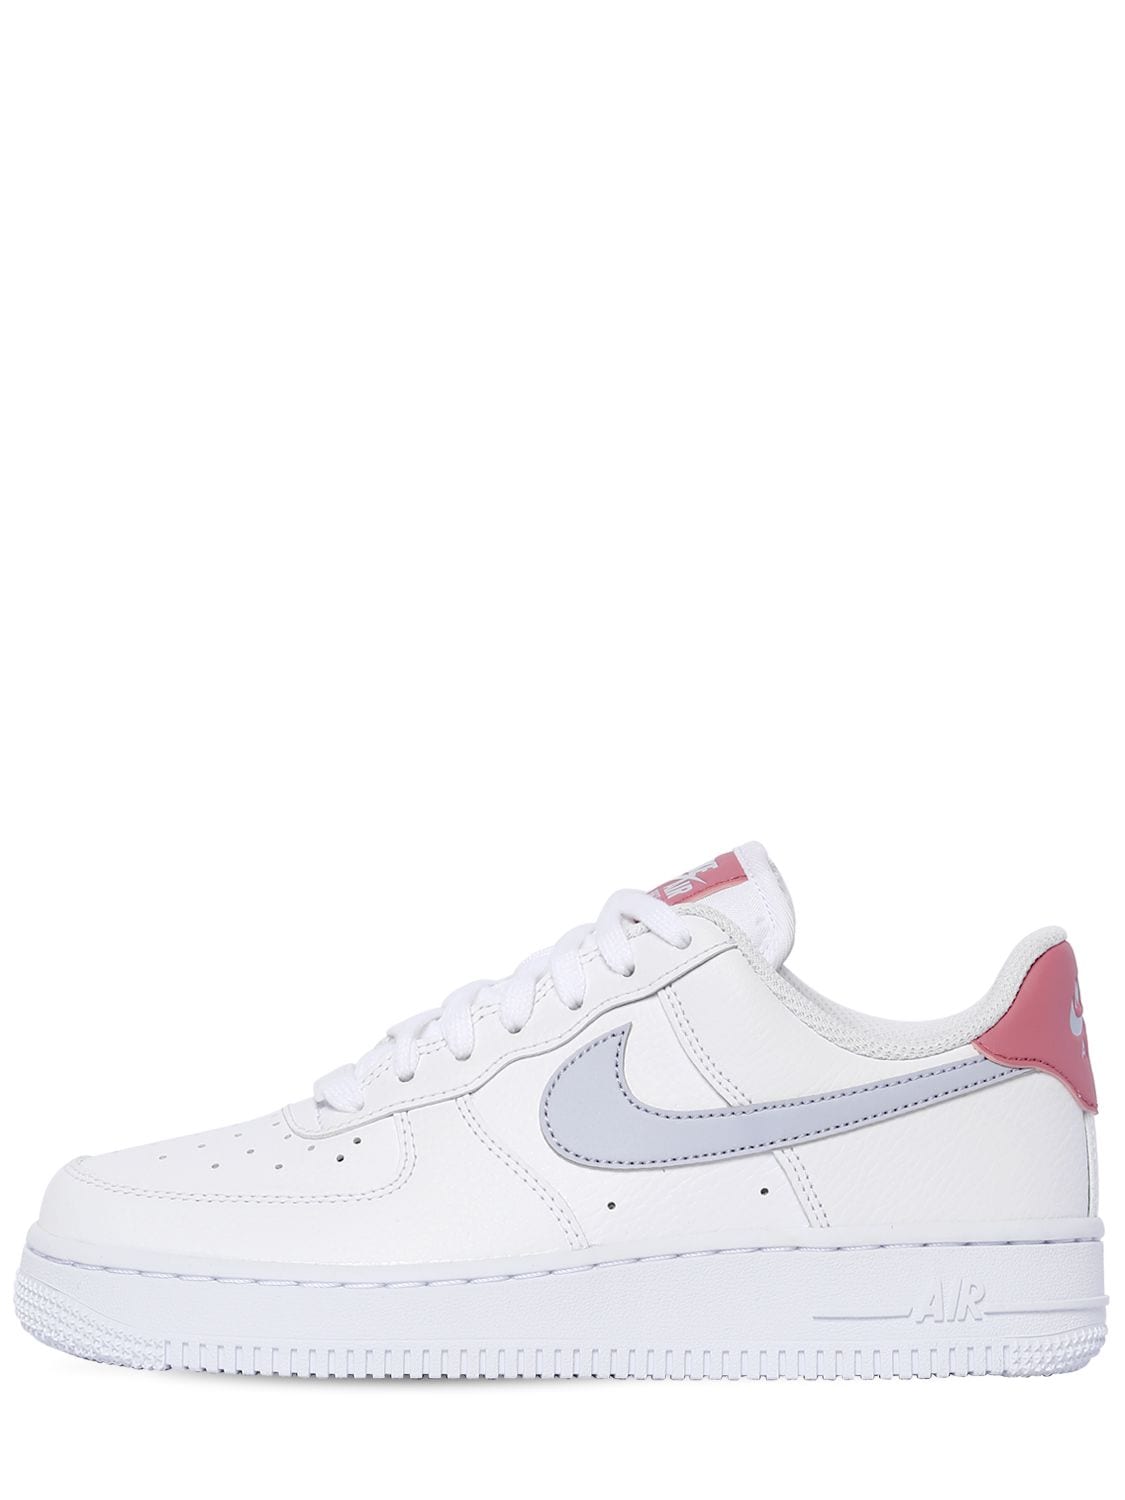 Nike Air Force 1 '07 Ess Trainers In White,ghost